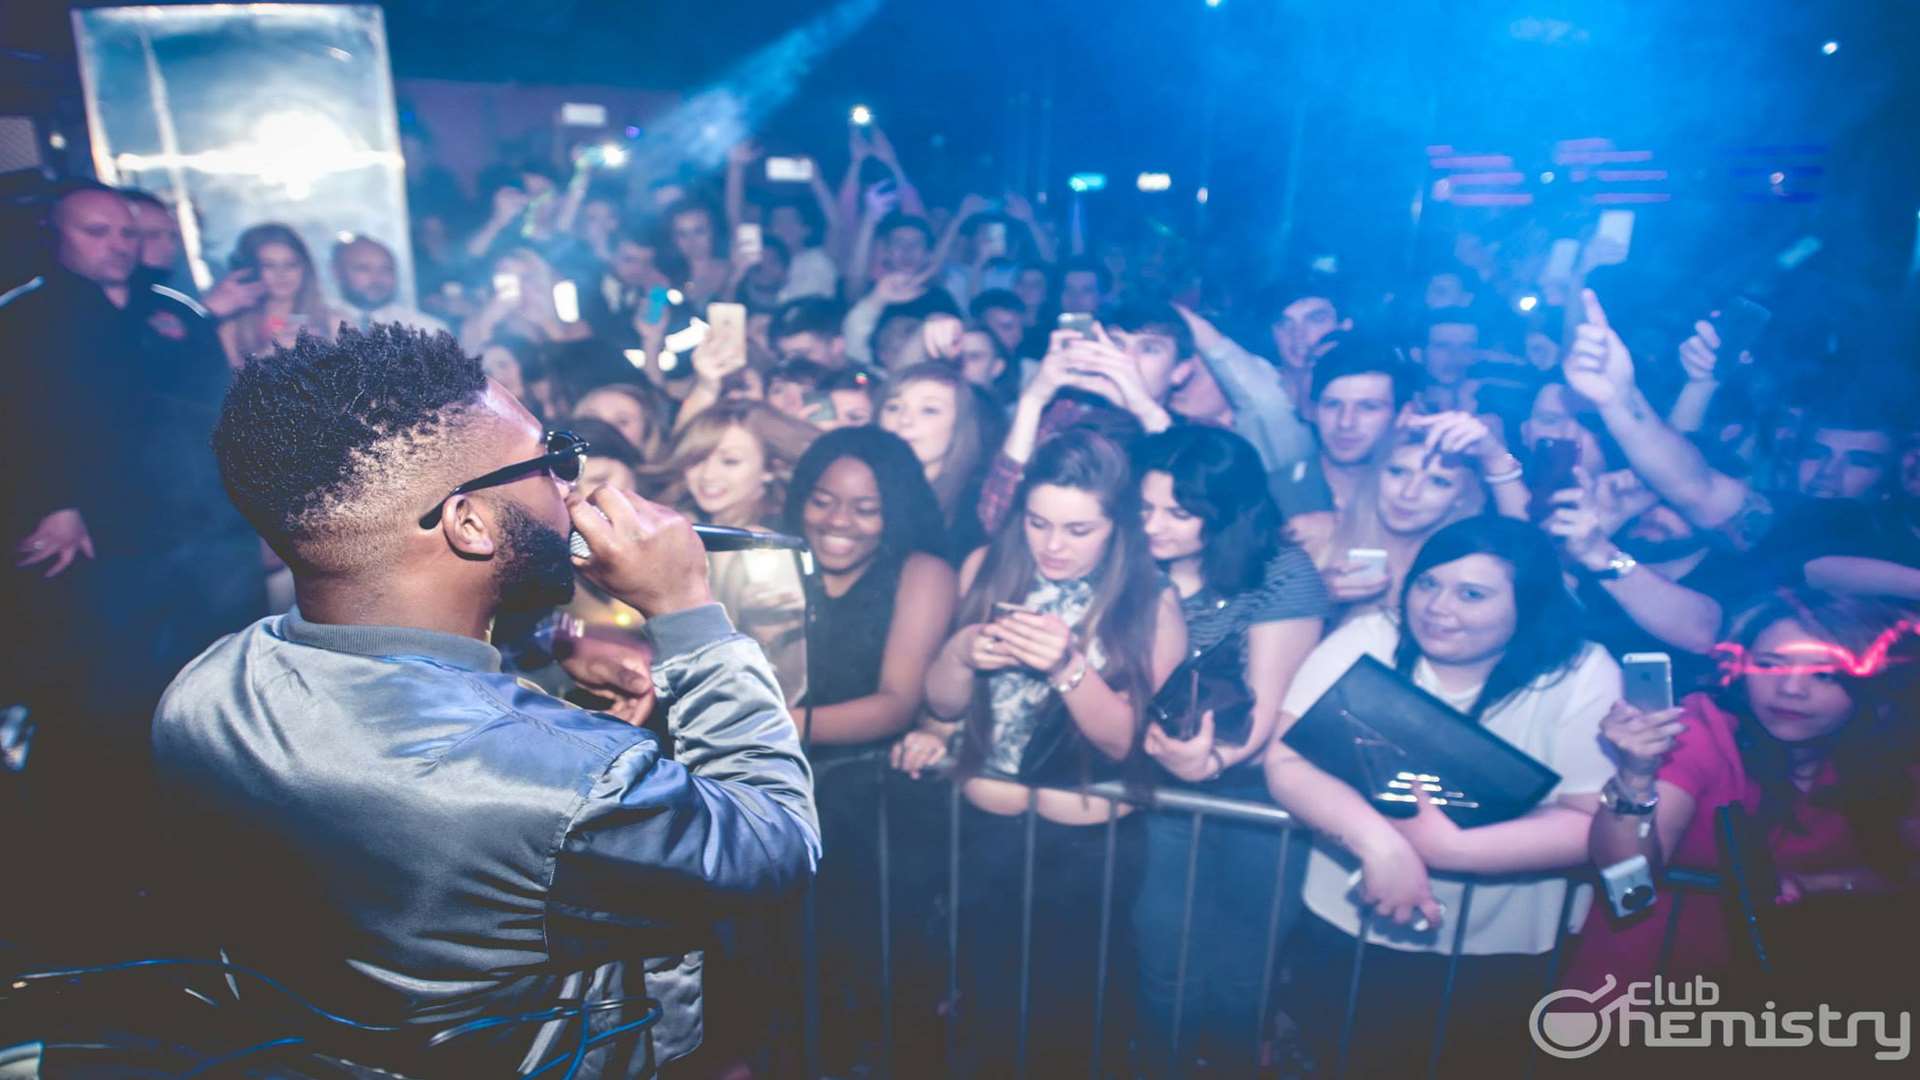 Tinie Tempah during his short set at Club Chemistry last night. Picture: Club Chemistry